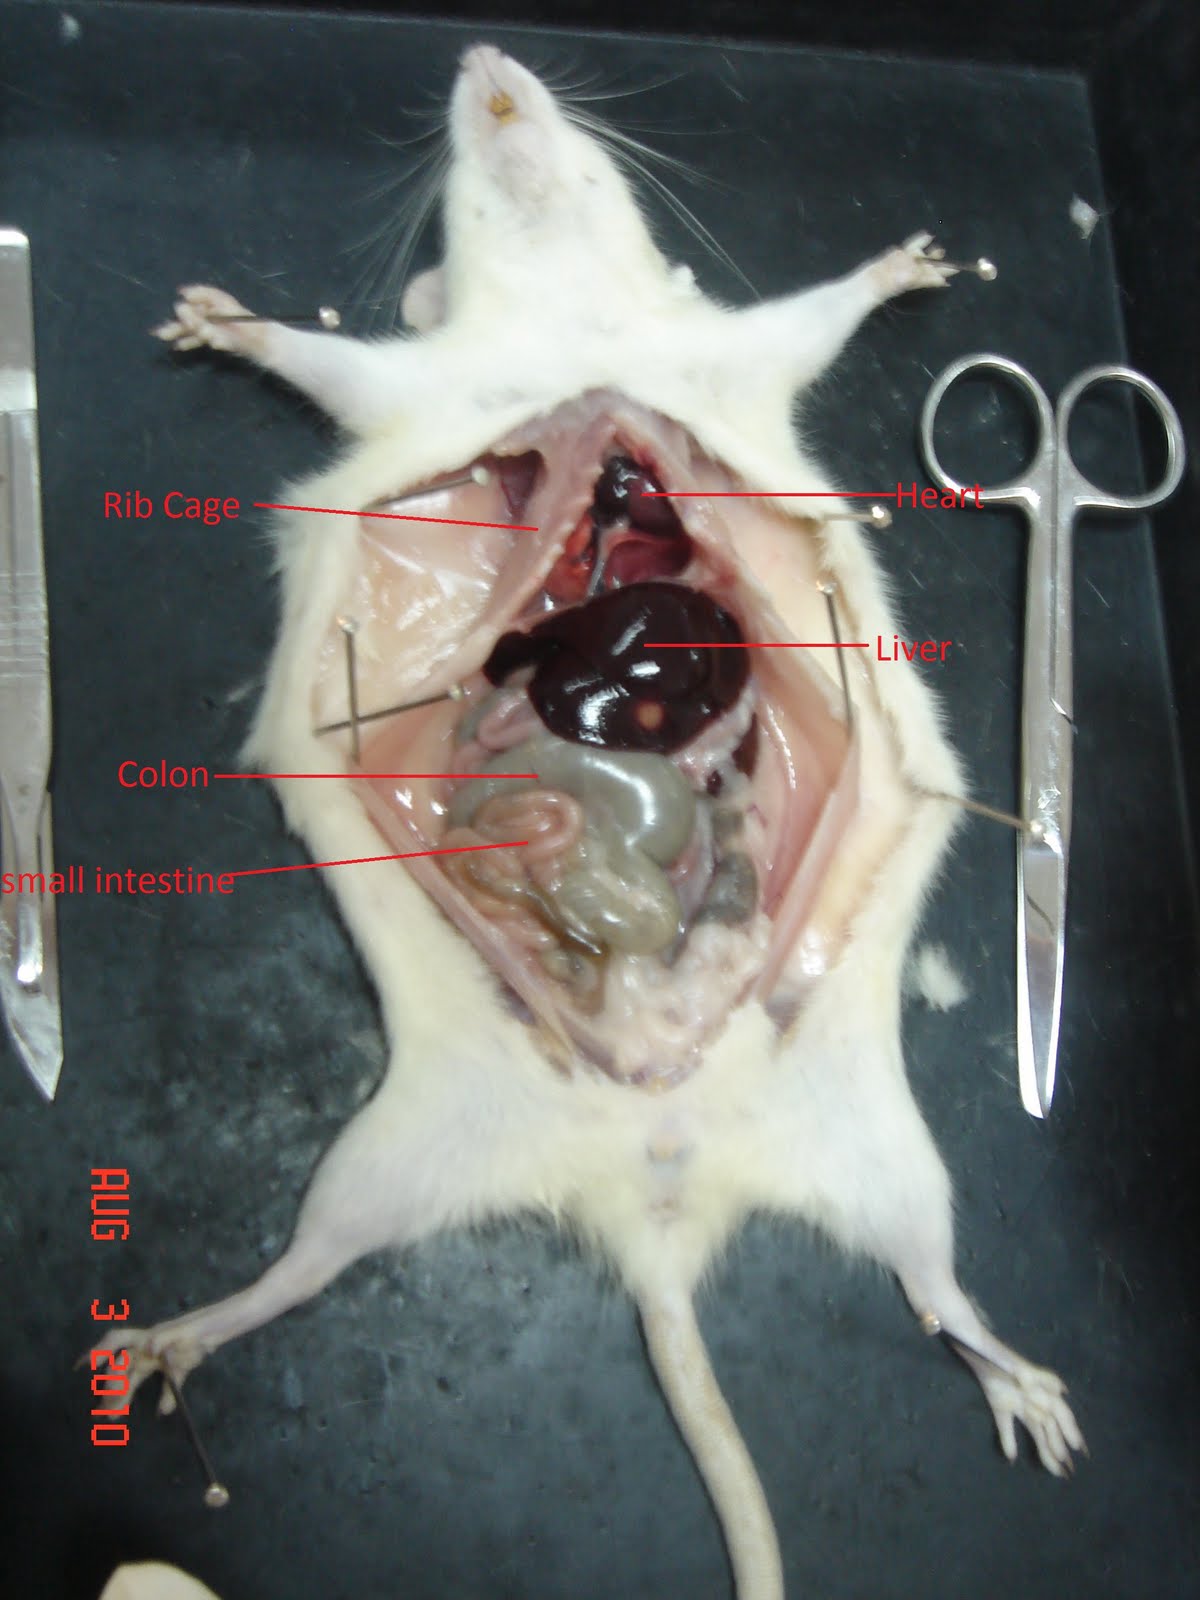 Just My Life: Rat dissection